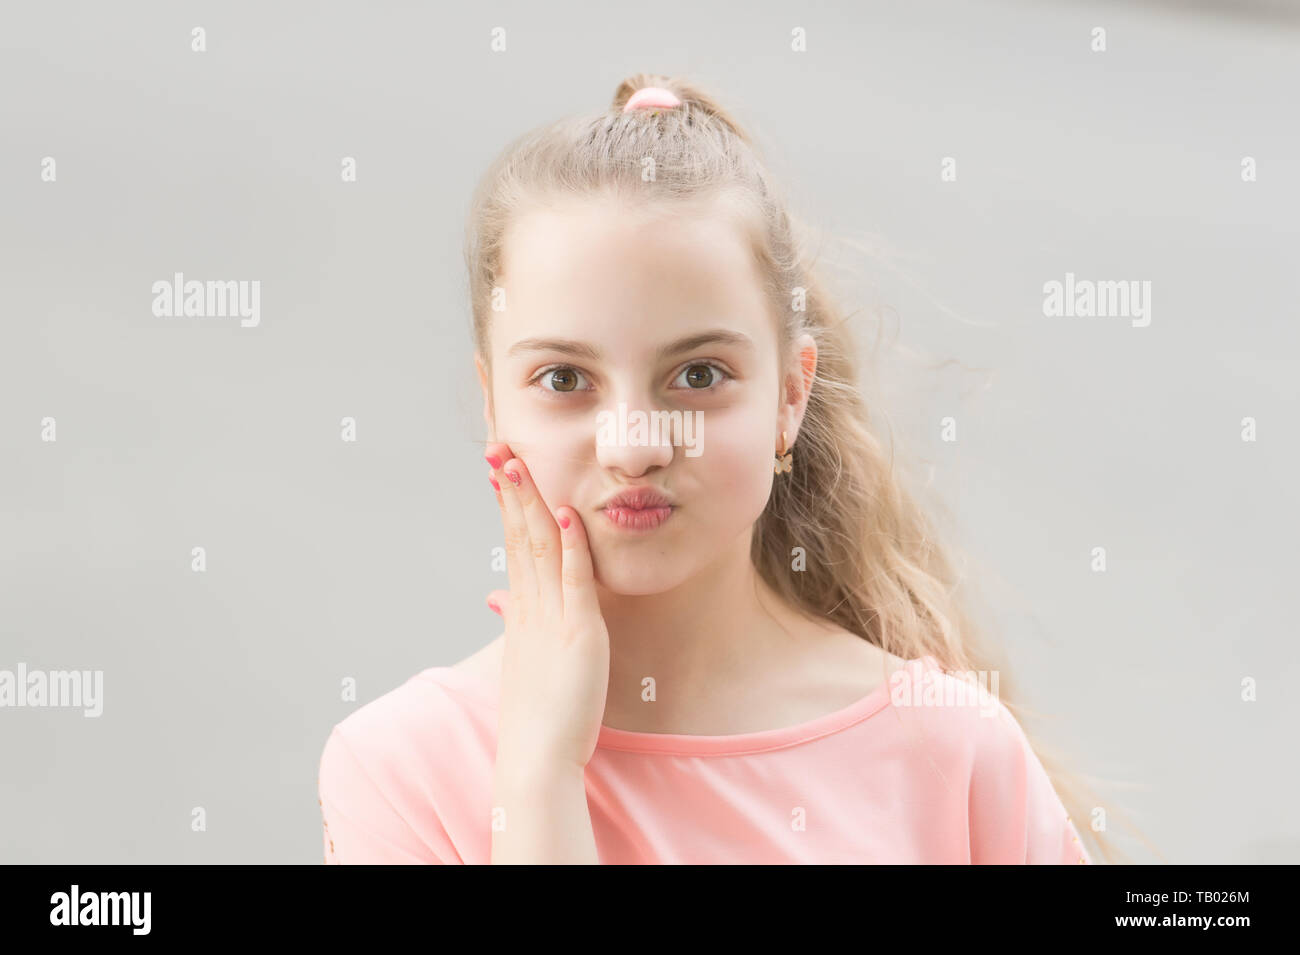 Baby face. Adorable baby face look. Little child with cute face. Small girl  with healthy young face skin and long blond hair Stock Photo - Alamy